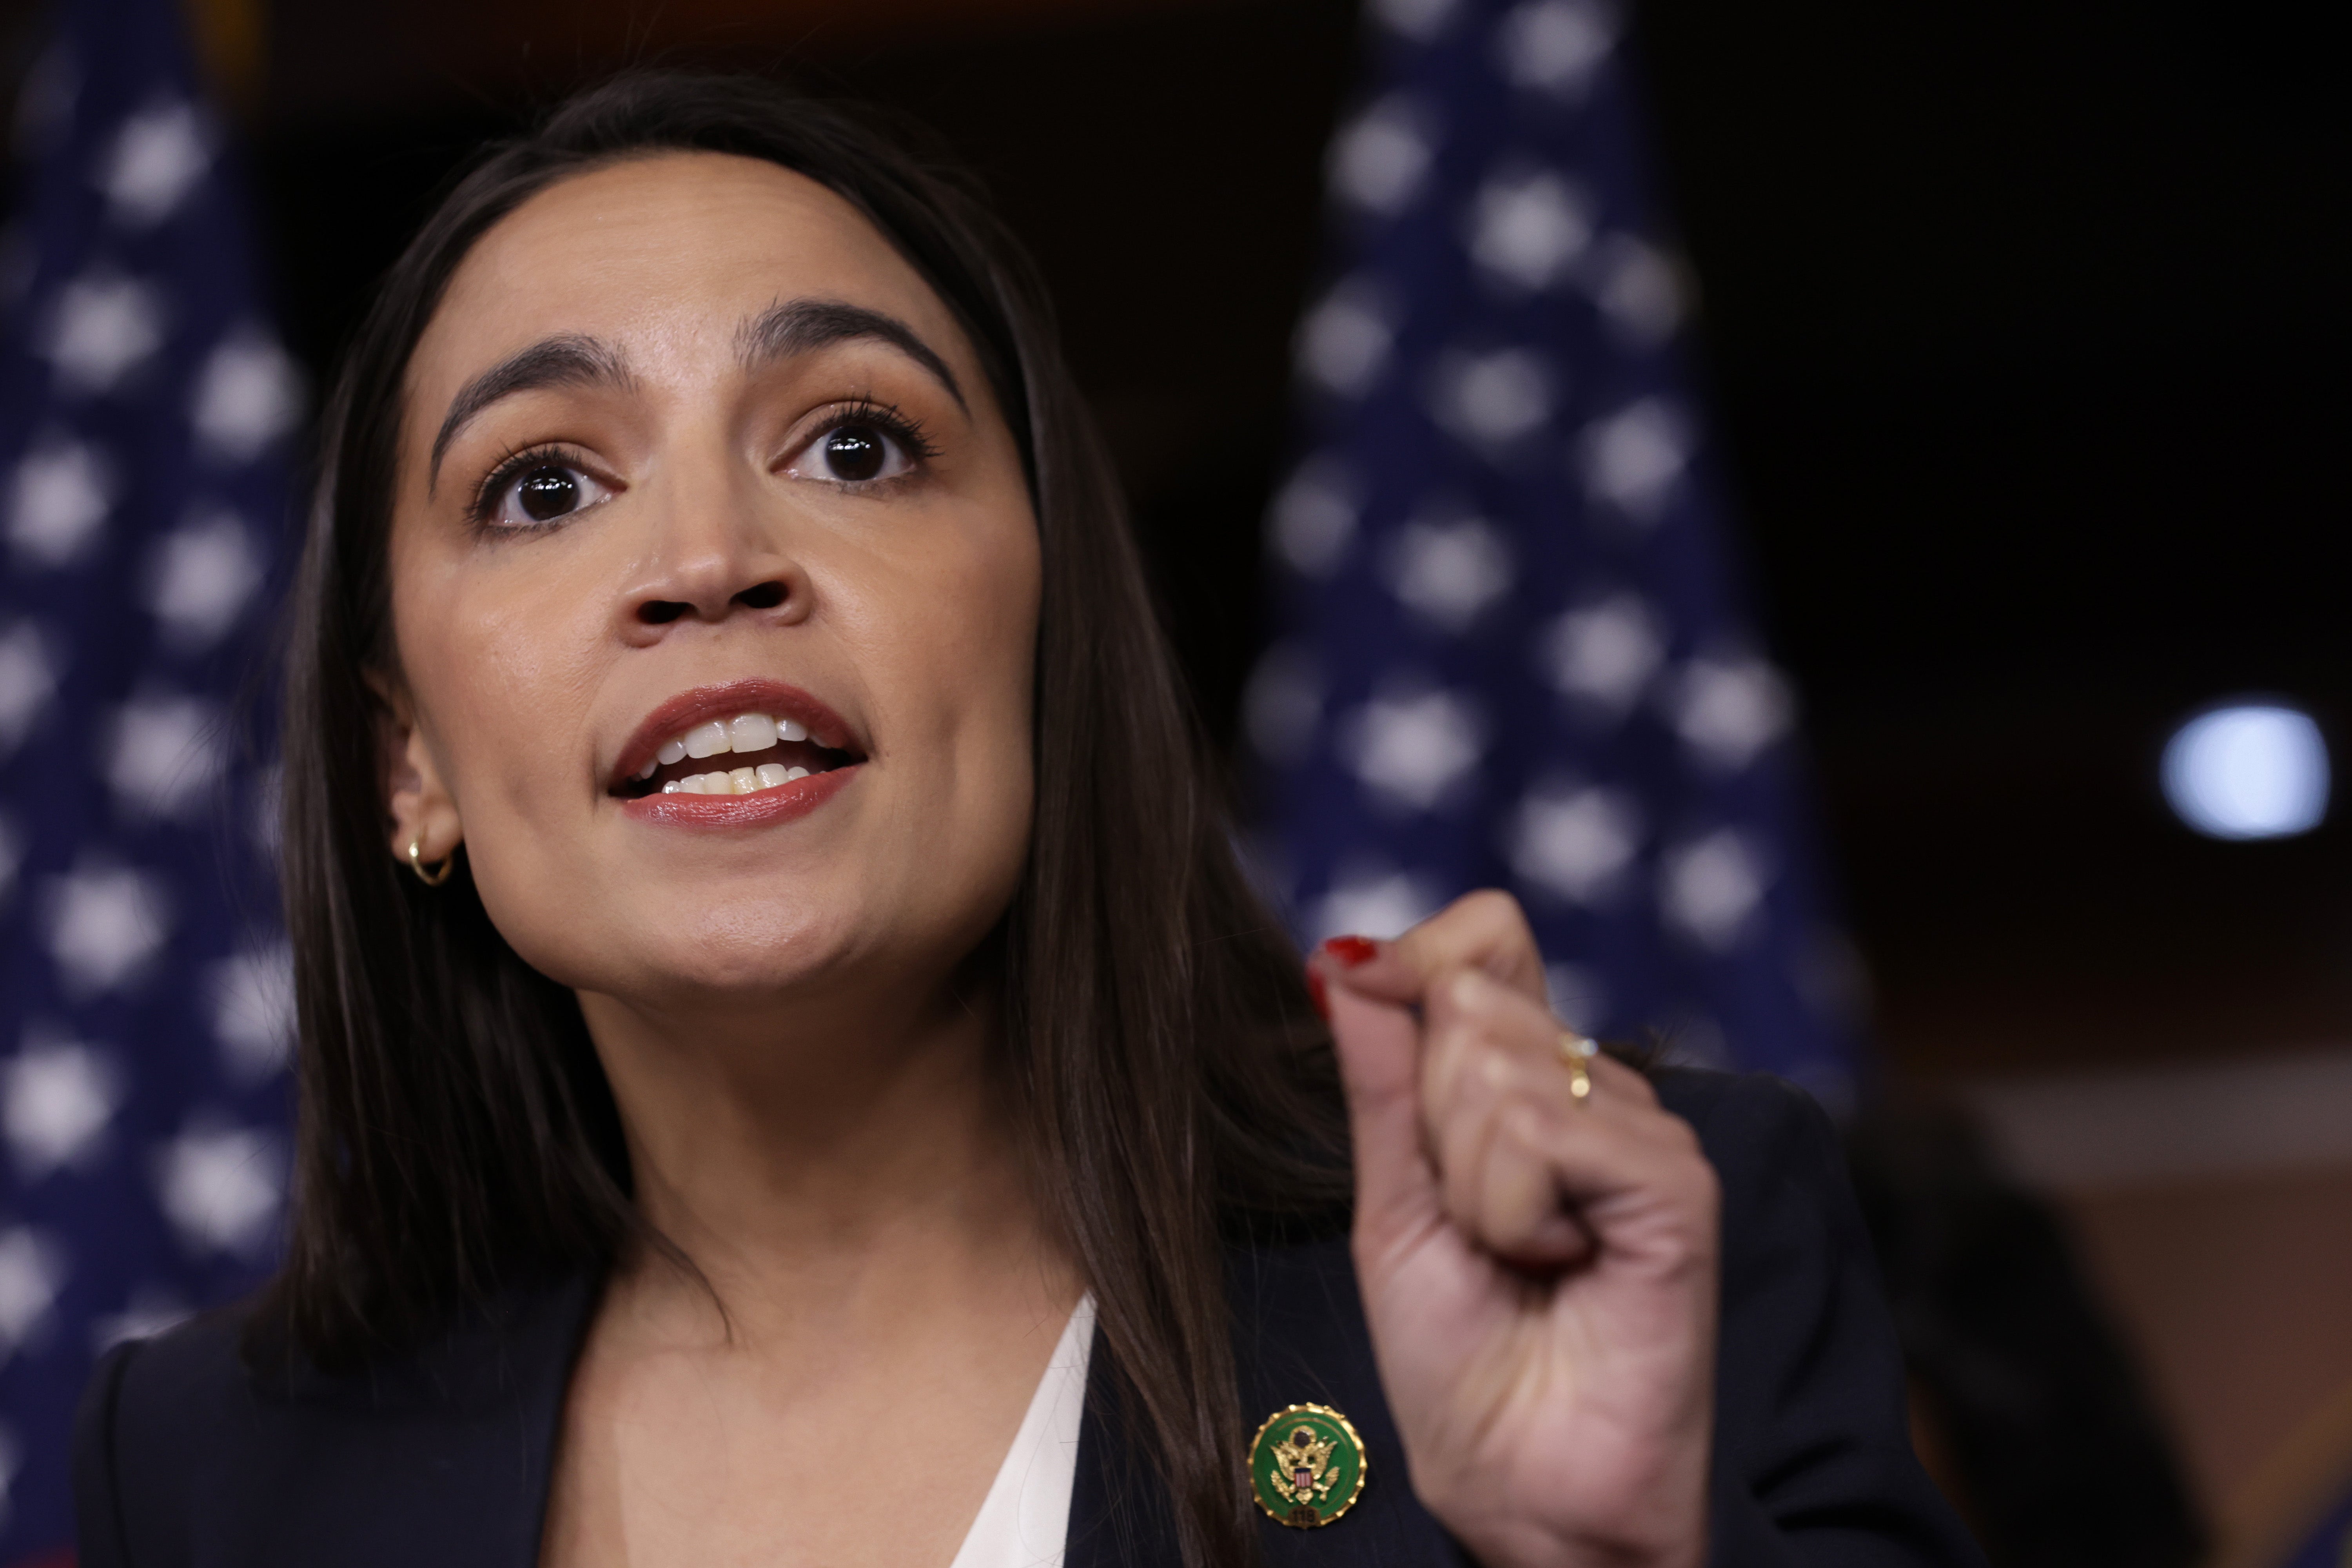 Alexandria Ocasio-Cortez said disparities between CEO and employee incomes had skyrocketed during the pandemic